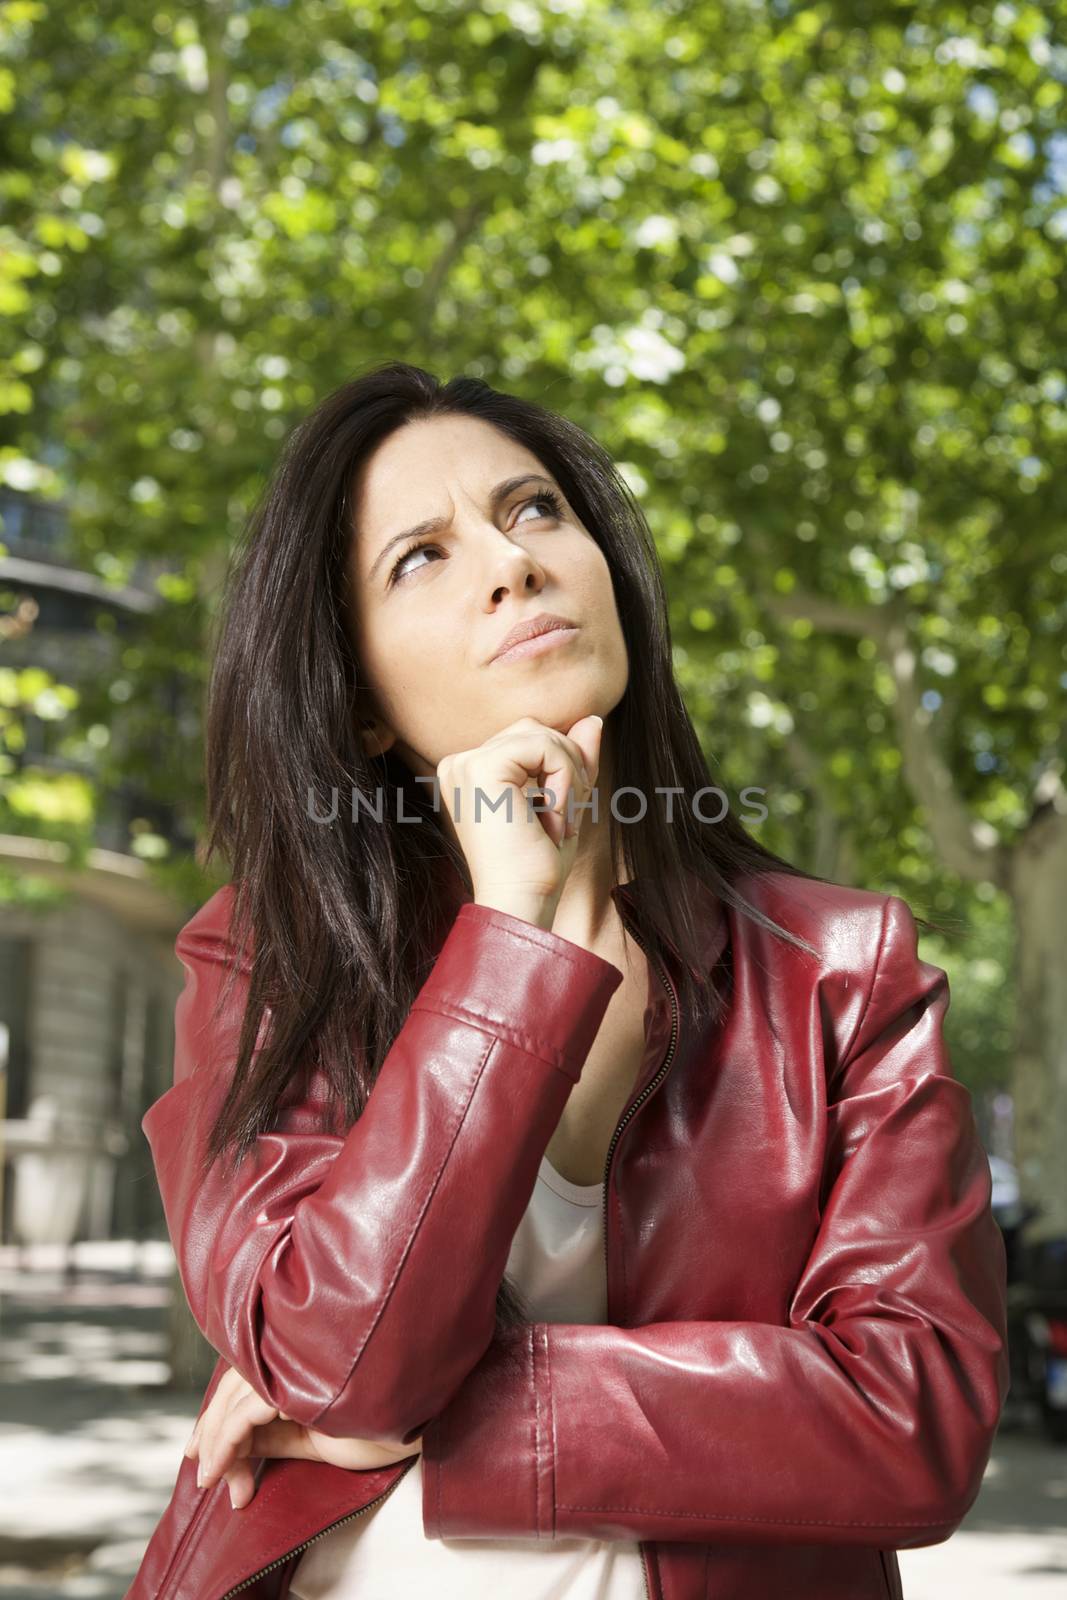 pensive woman by quintanilla